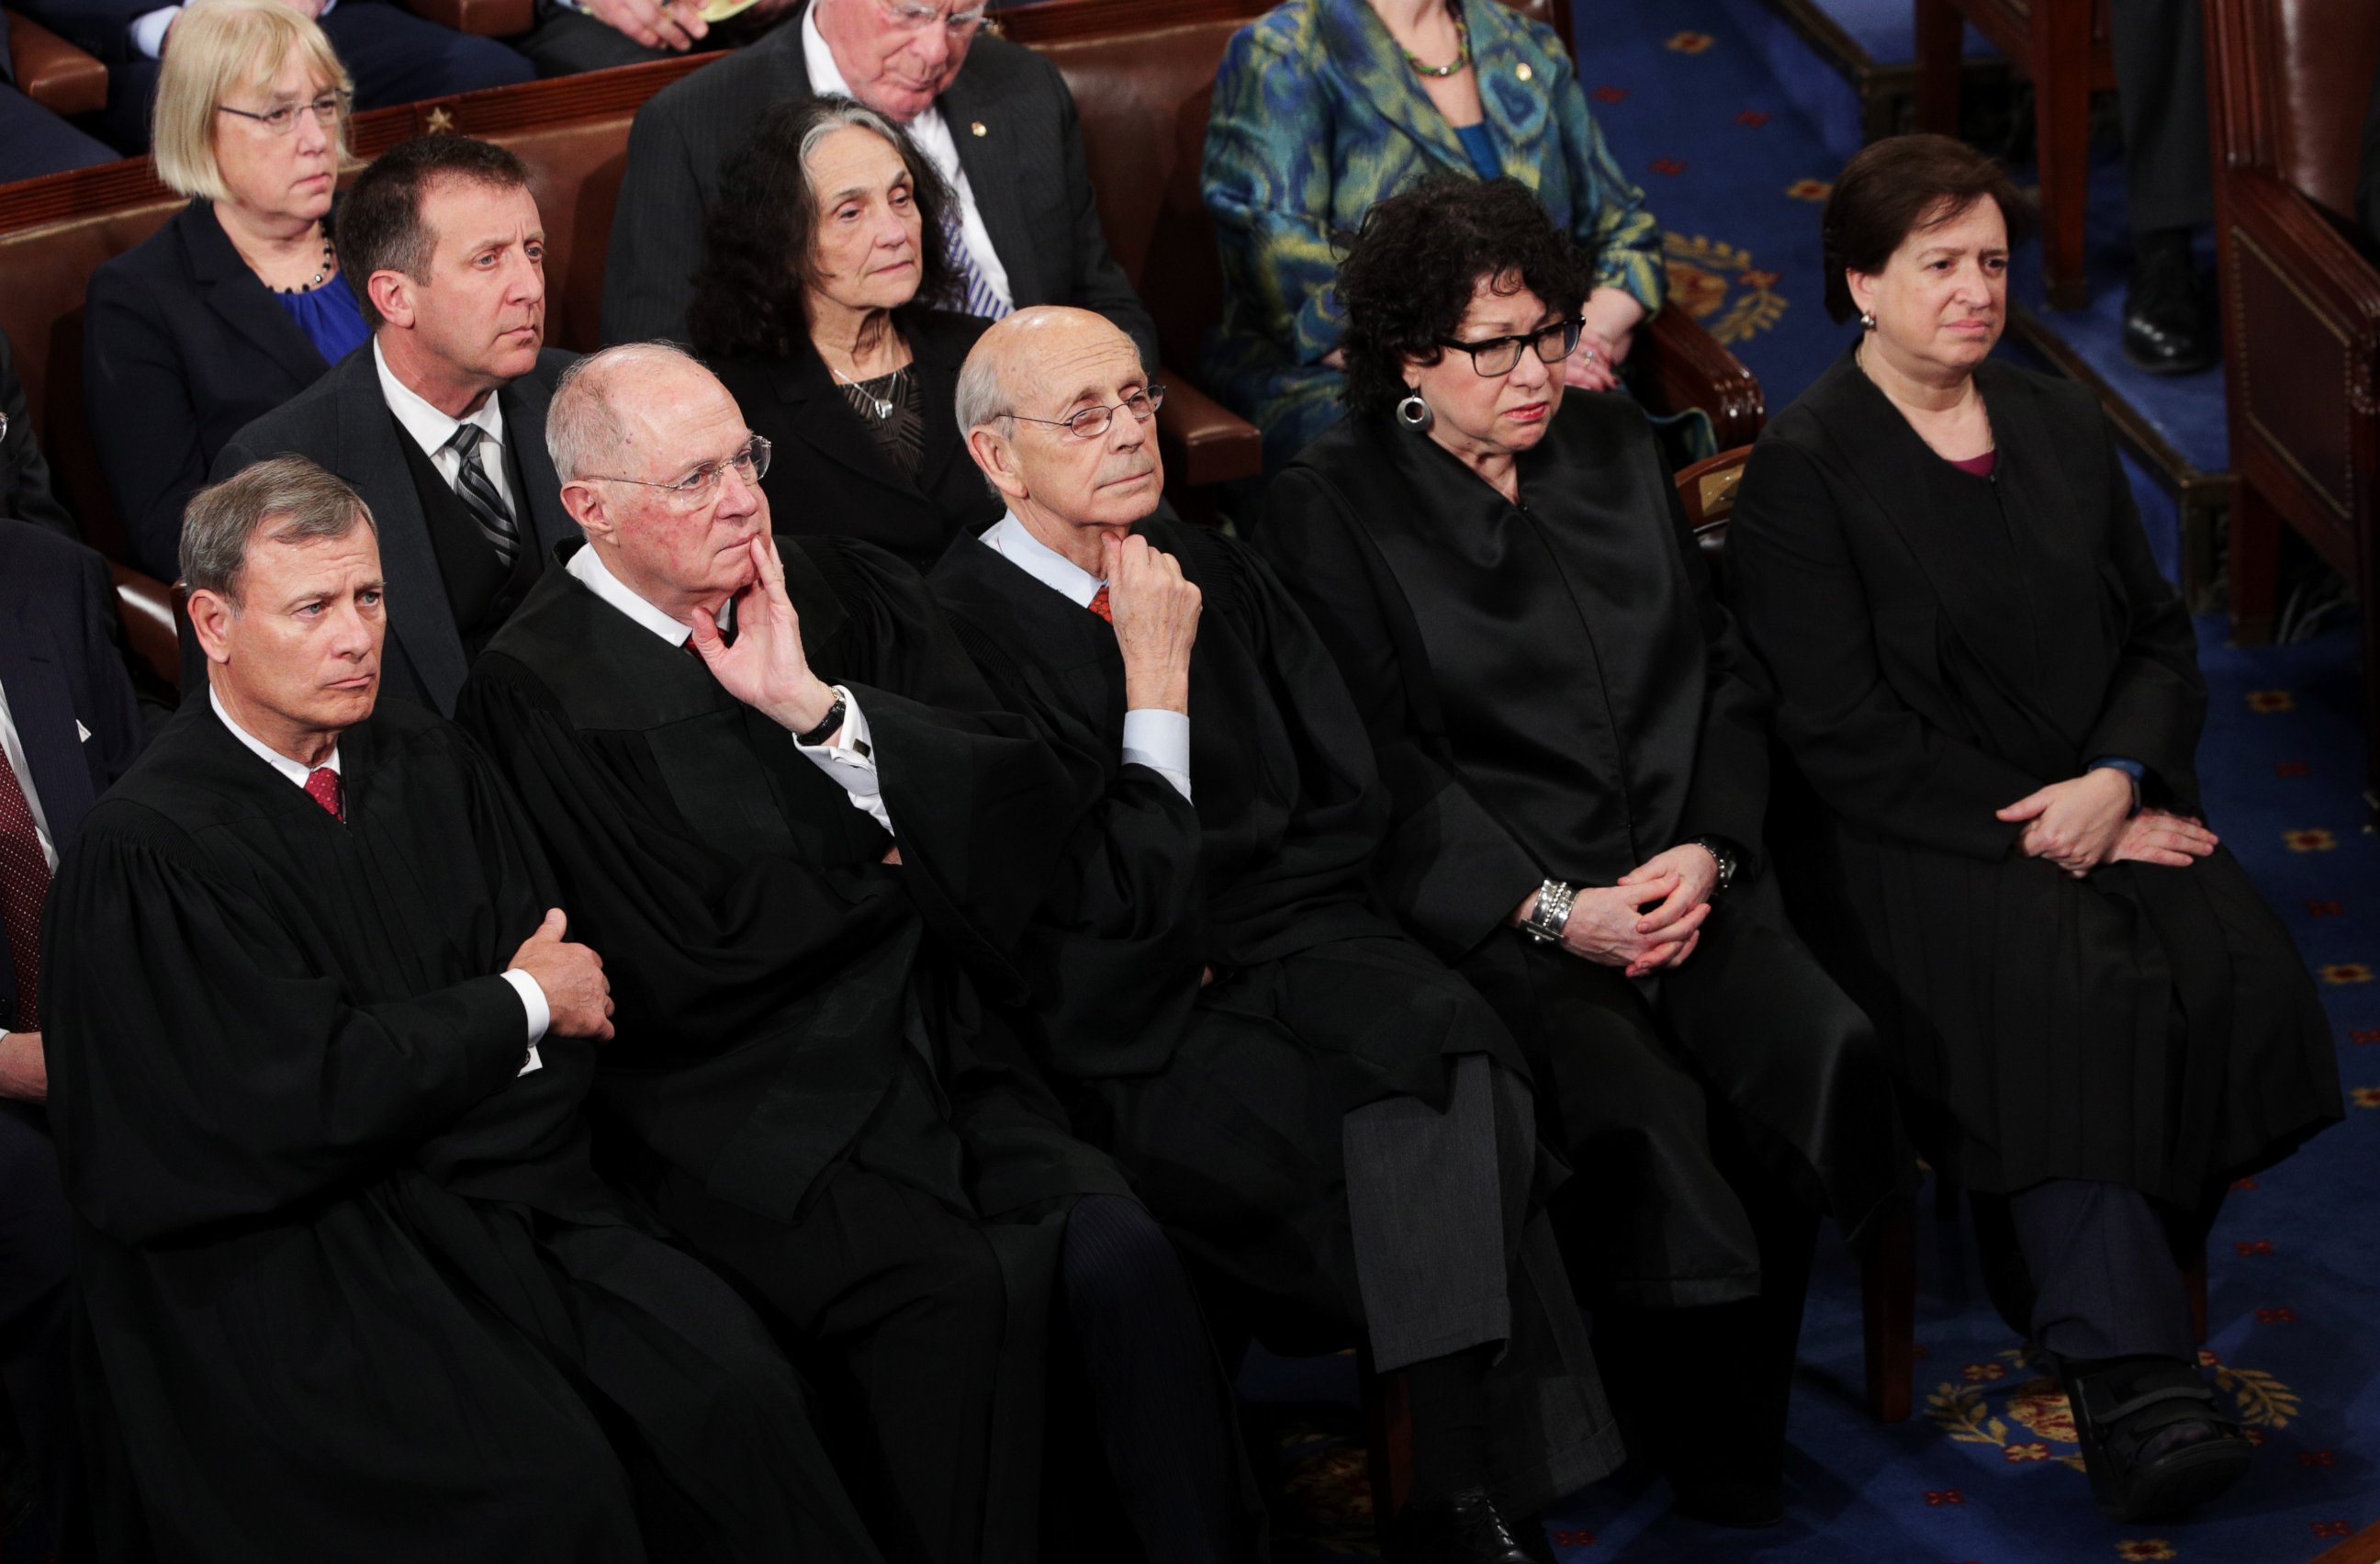 PHOTO: (L-R) Supreme Court Justices John Roberts, Anthony Kennedy, Stephen Breyer, Sonia Sotomayor and Elena Kagan look on as President Donald Trump addresses a joint session of Congress, Feb. 28, 2017. 